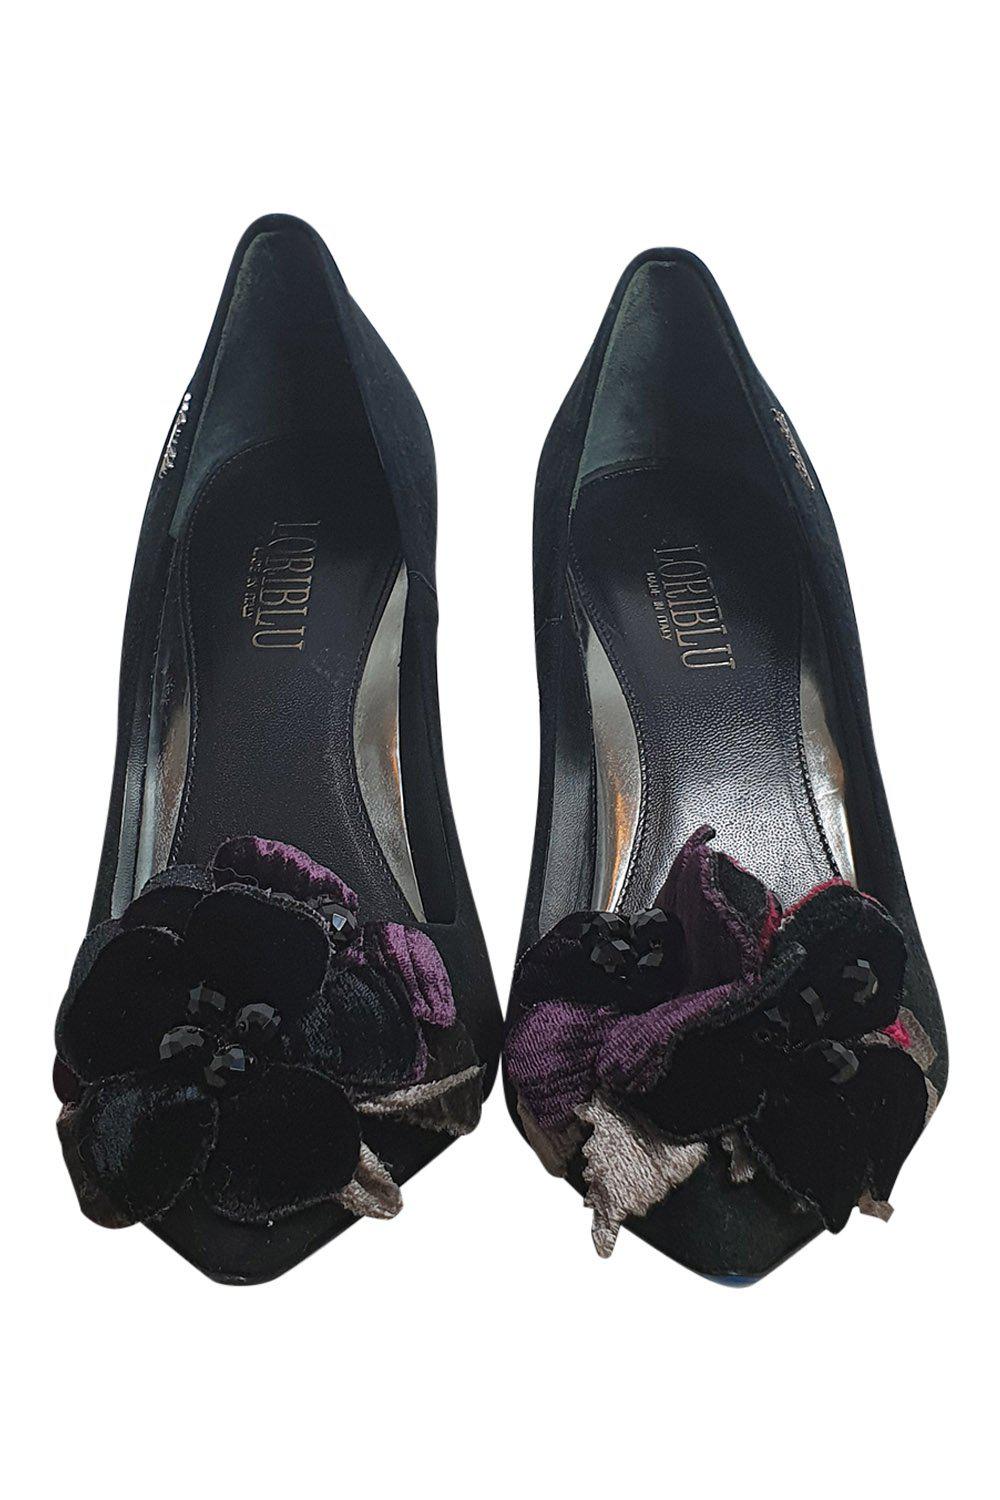 LORIBLU Black Floral Suede Pointed Toe Stiletto Heel (38)-The Freperie